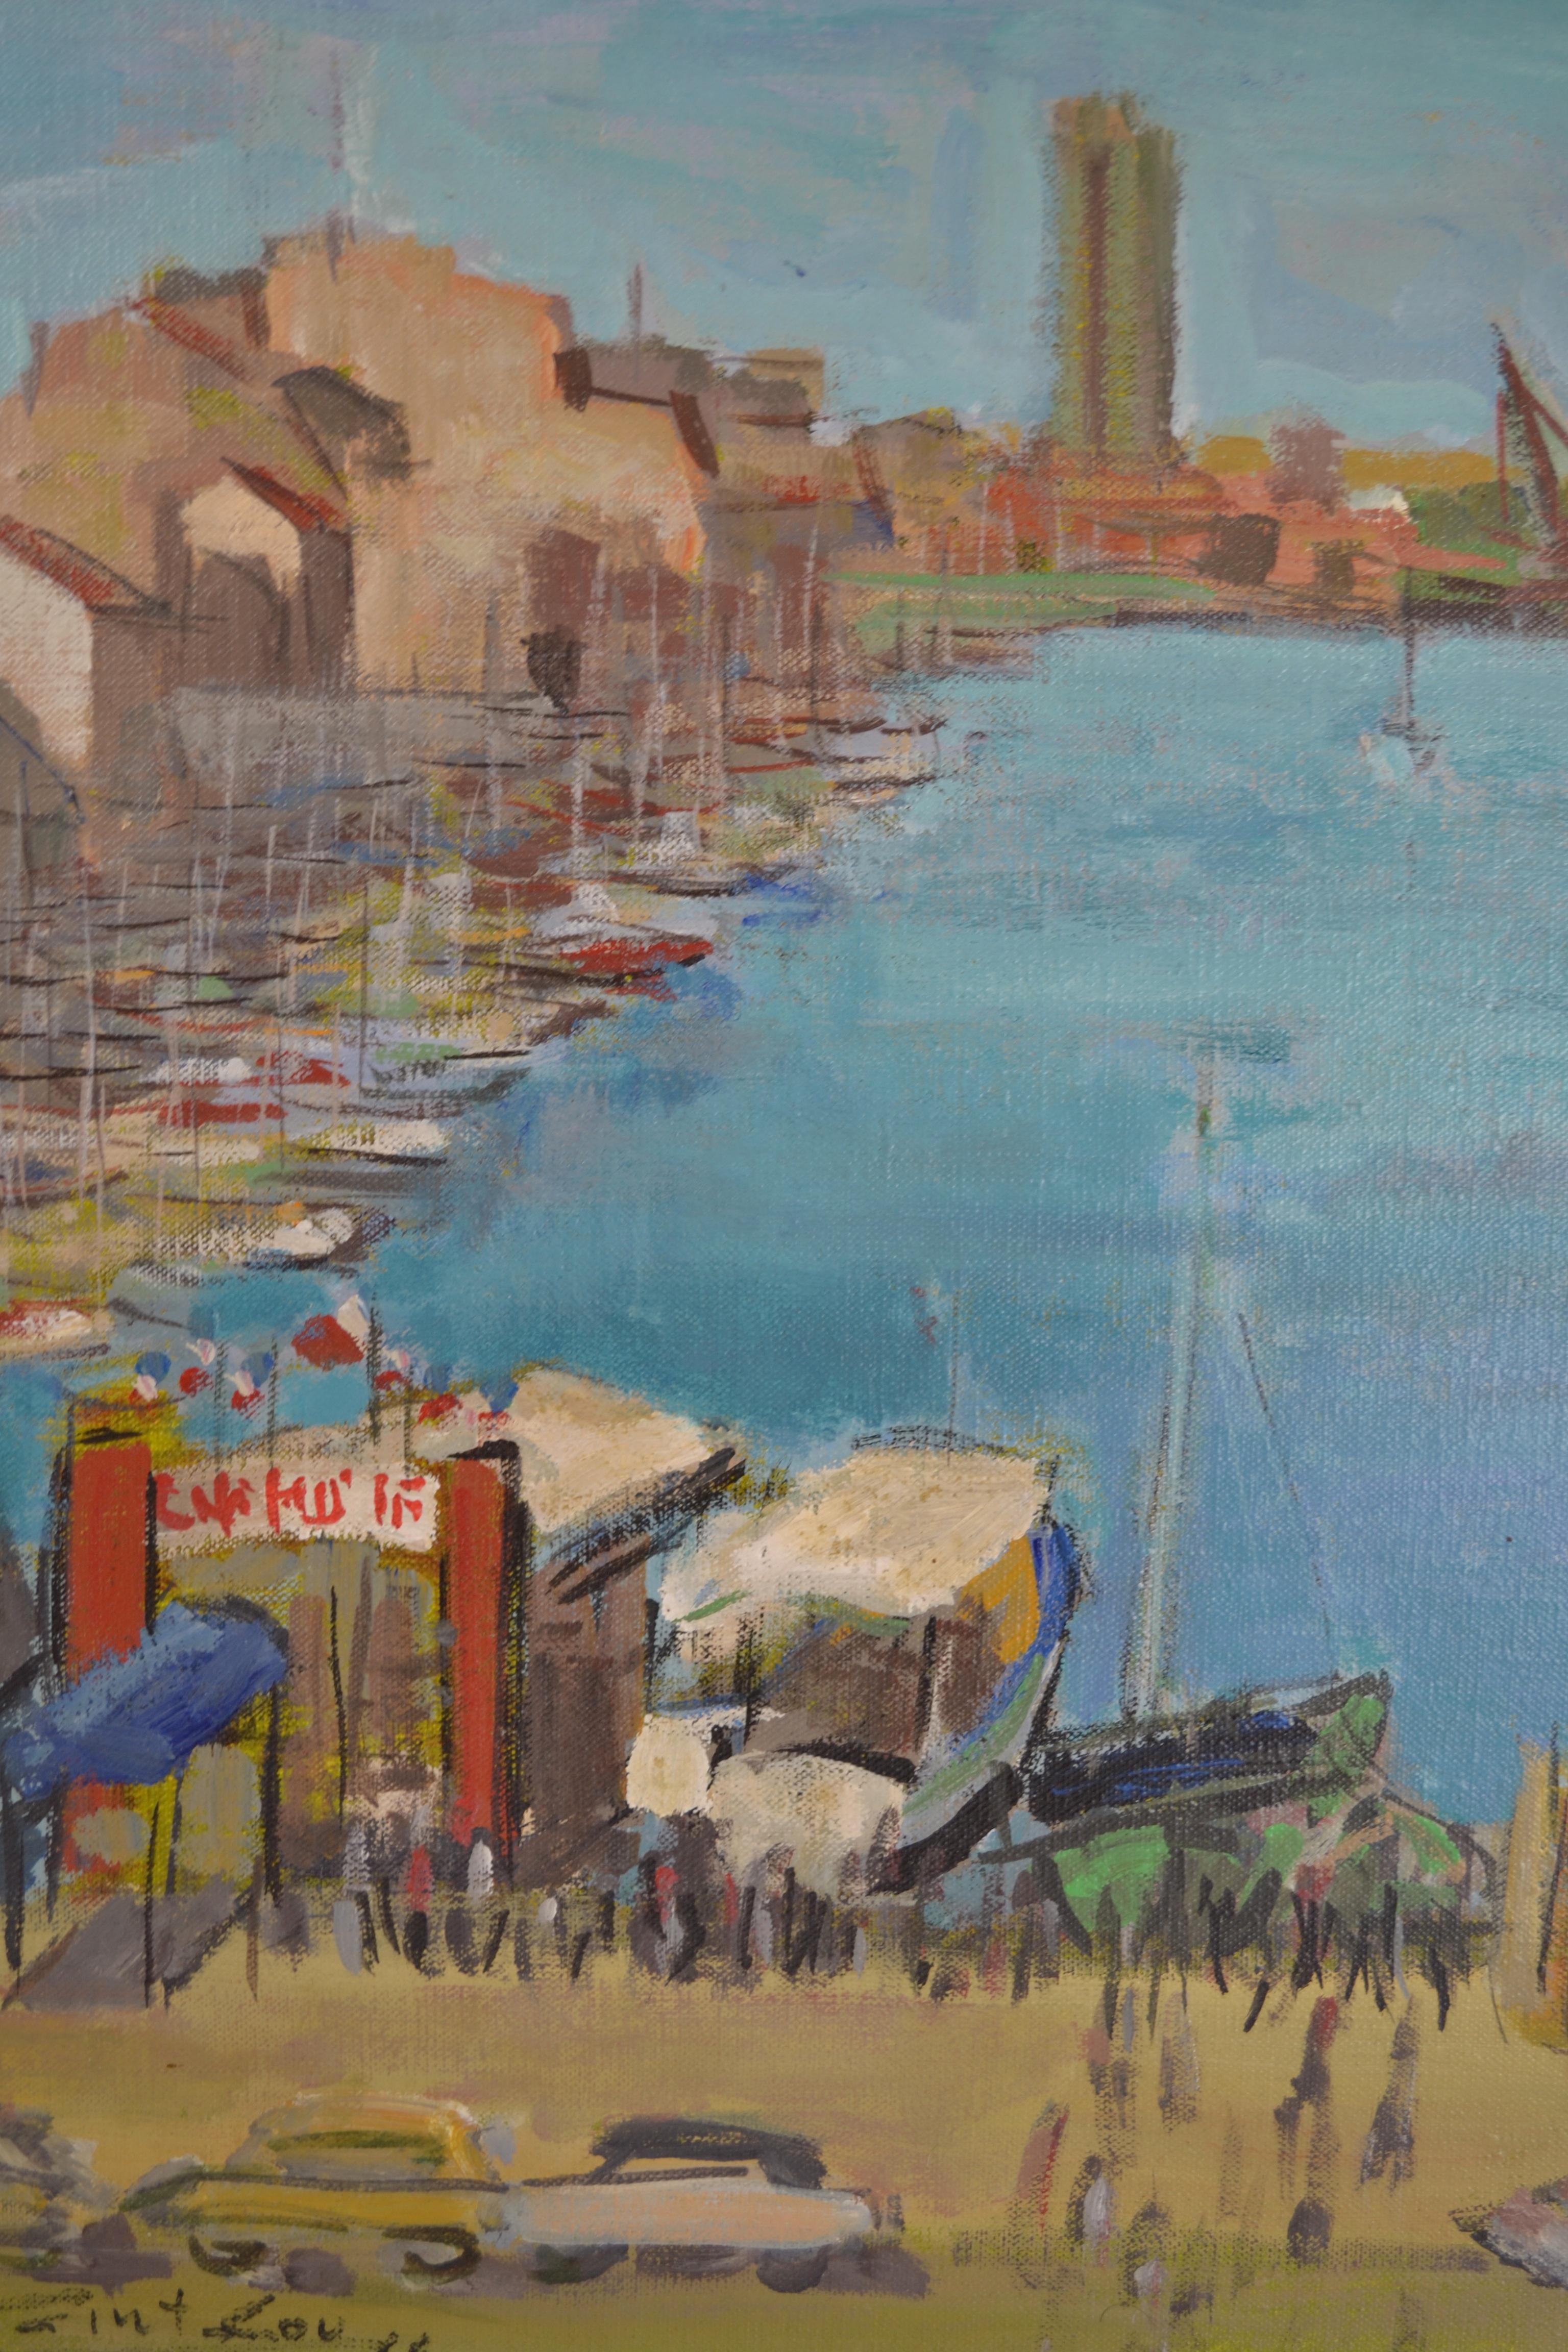 An original oil painting in a gilded wood frame signed by an unknown artist Zint Lov and dated 1966. The painting is in the style of Raoul Dufy and shows a Harbour scene full of boats and cars in the foreground with buildings in the background.